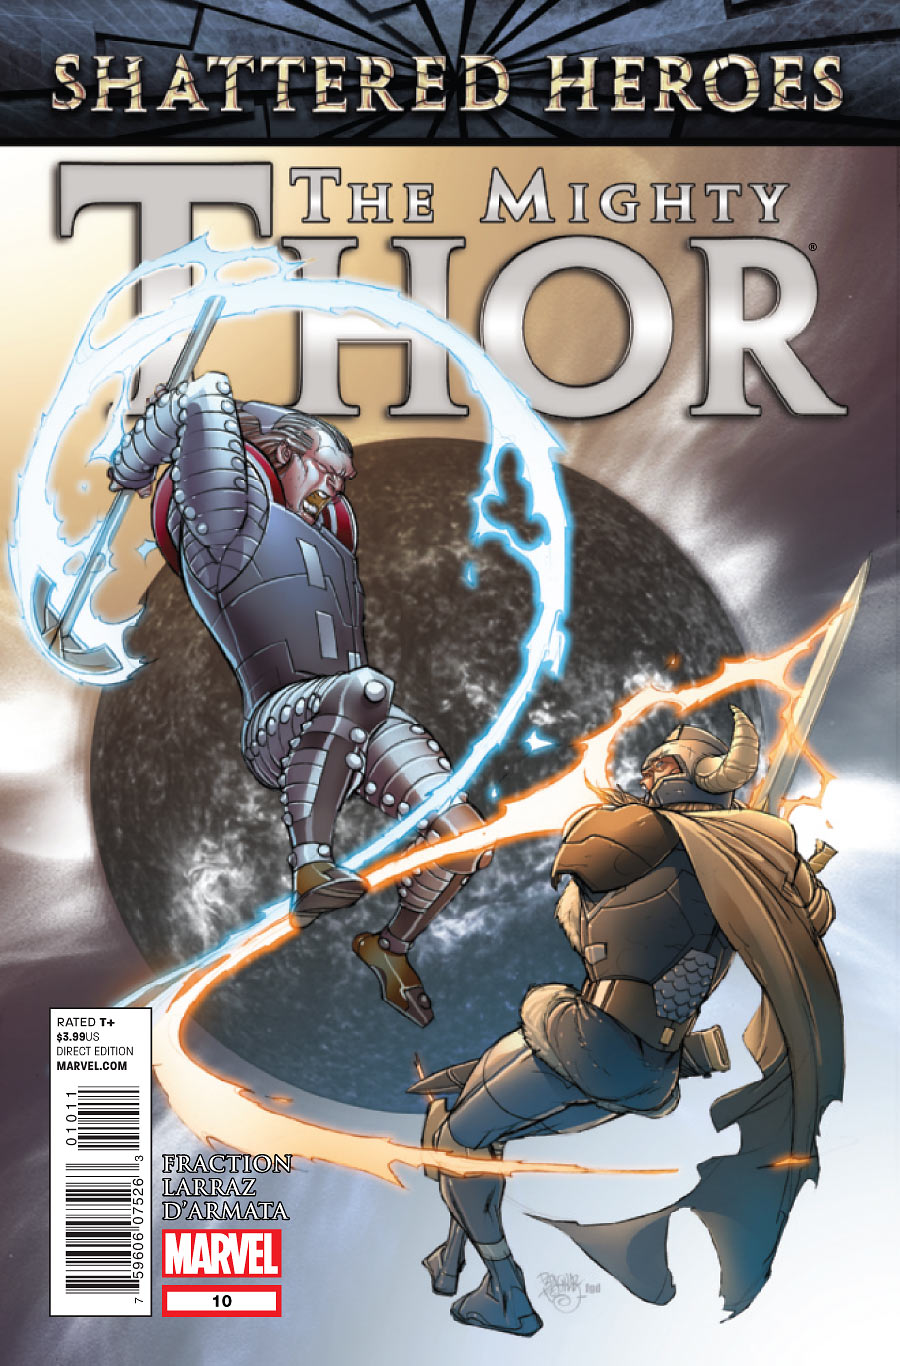 the mighty thor lords of midgard